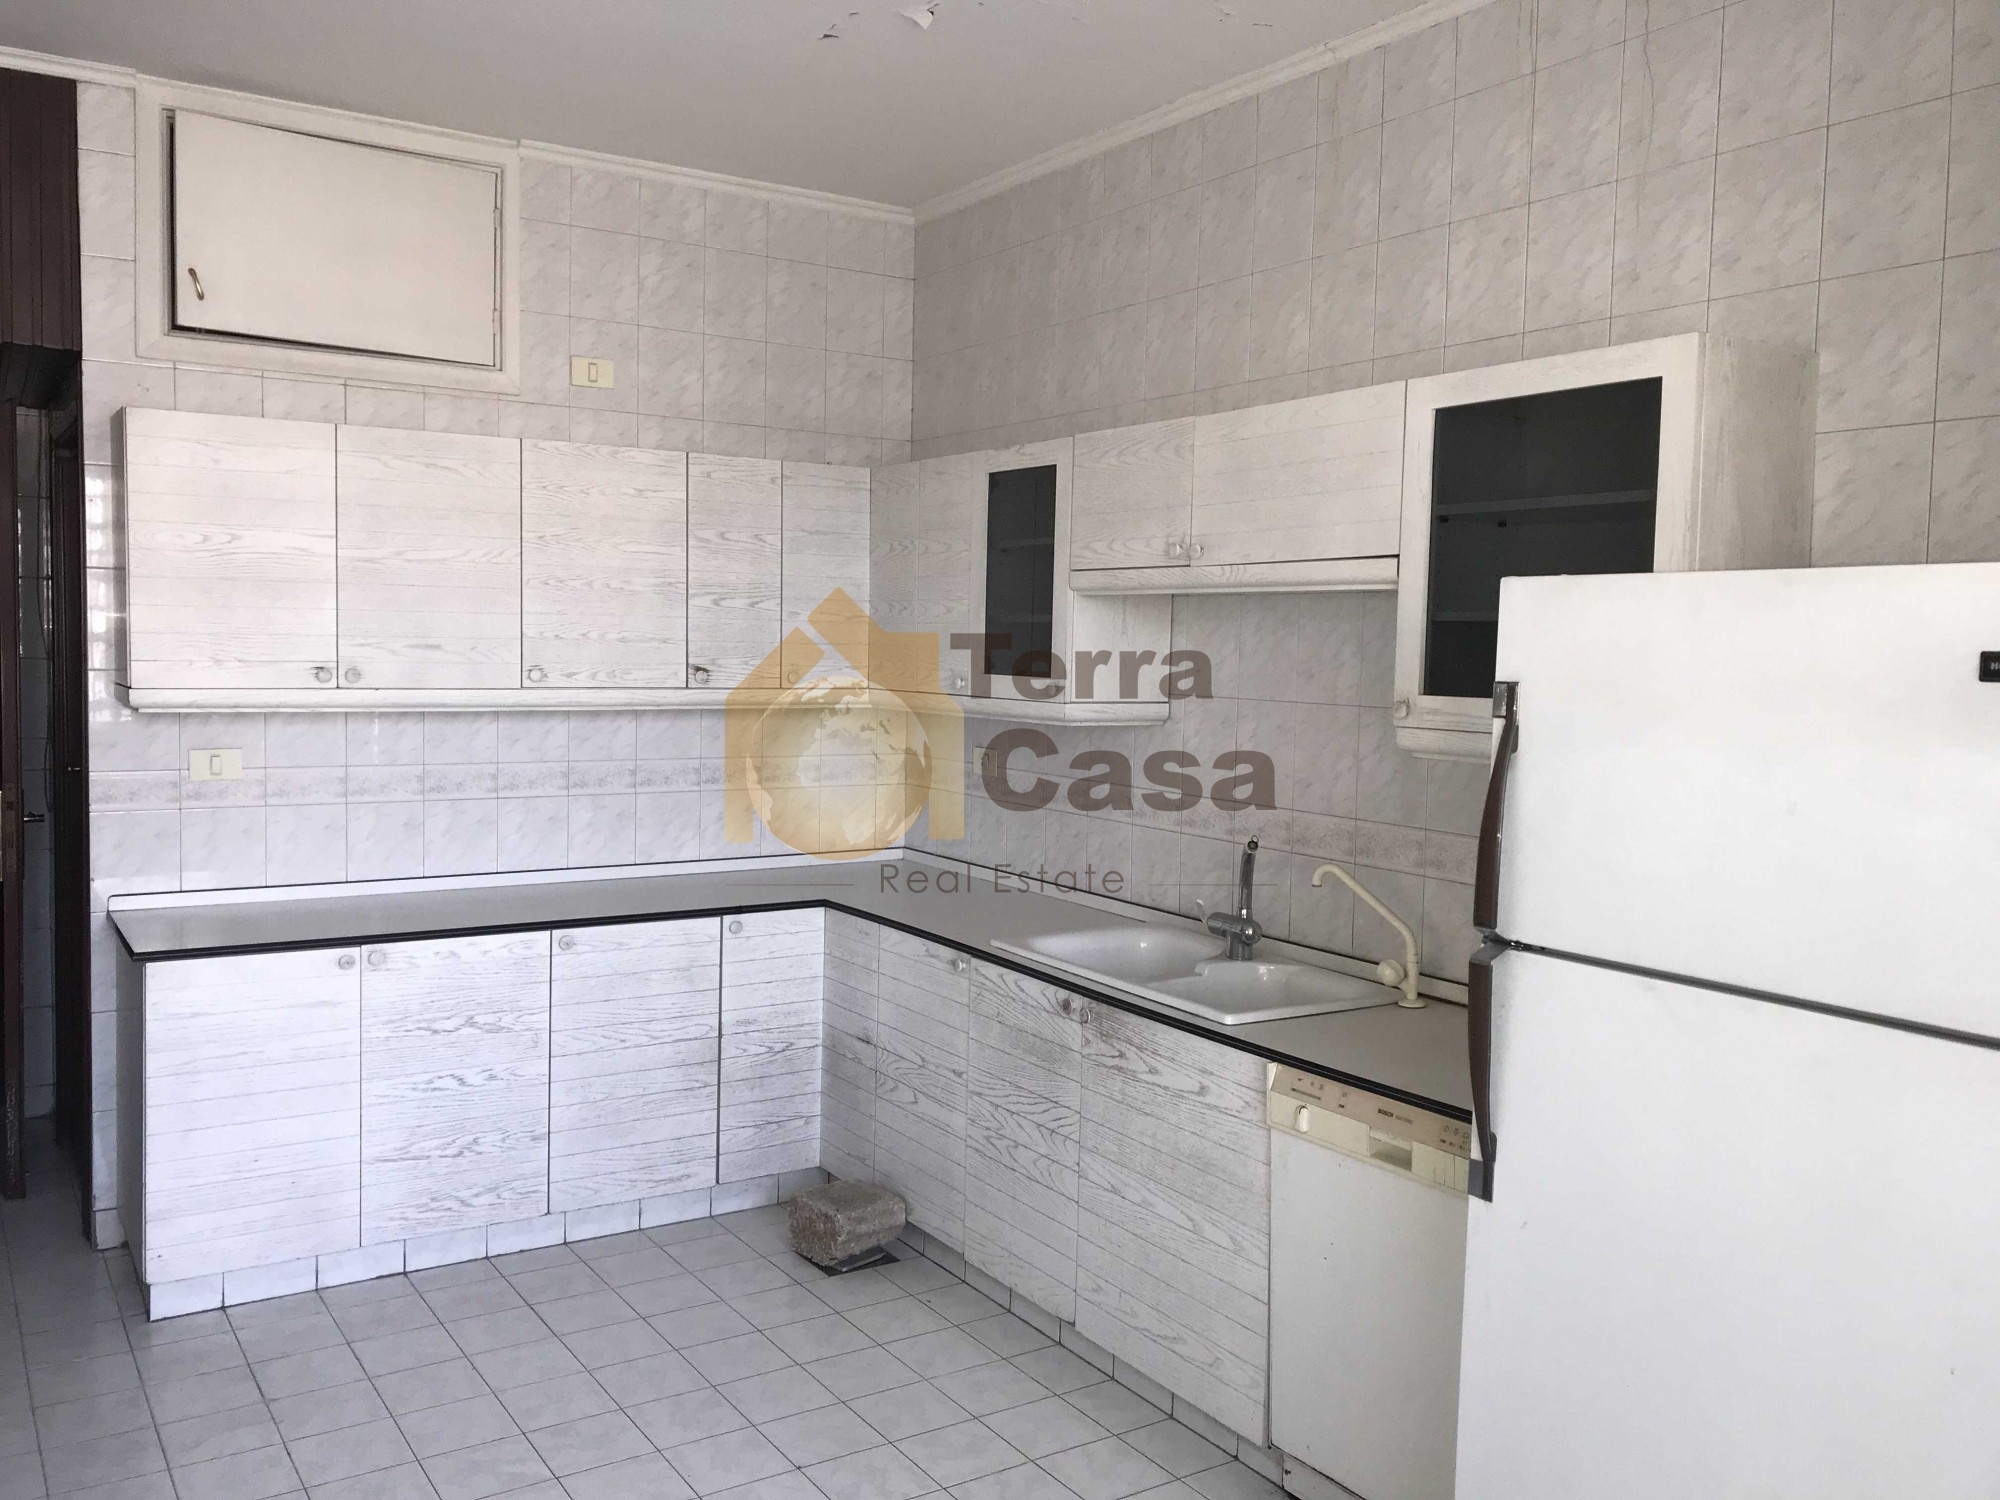 Fully furnished apartment for sale in Mar takla Ref#2836